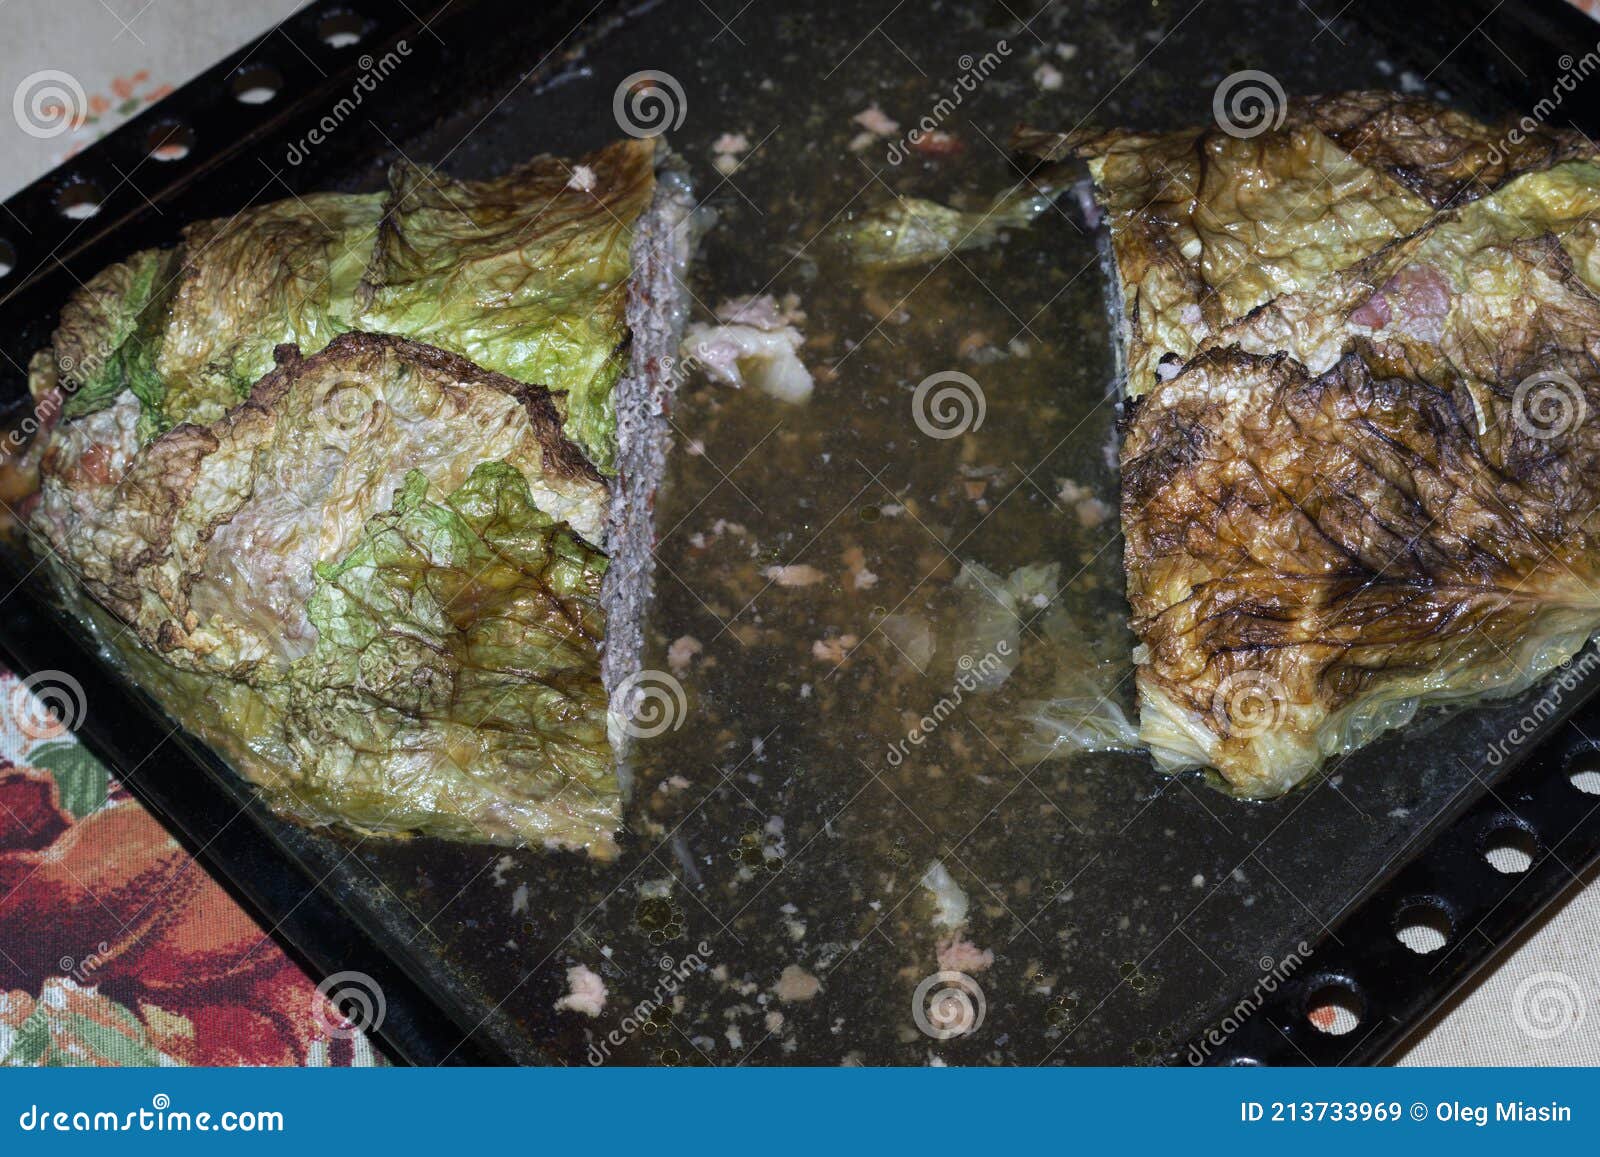 homemade big meat roll in savoy cabbage green blanch leaves, oven-baked in baking tray full of its own juice. cut out pieces from